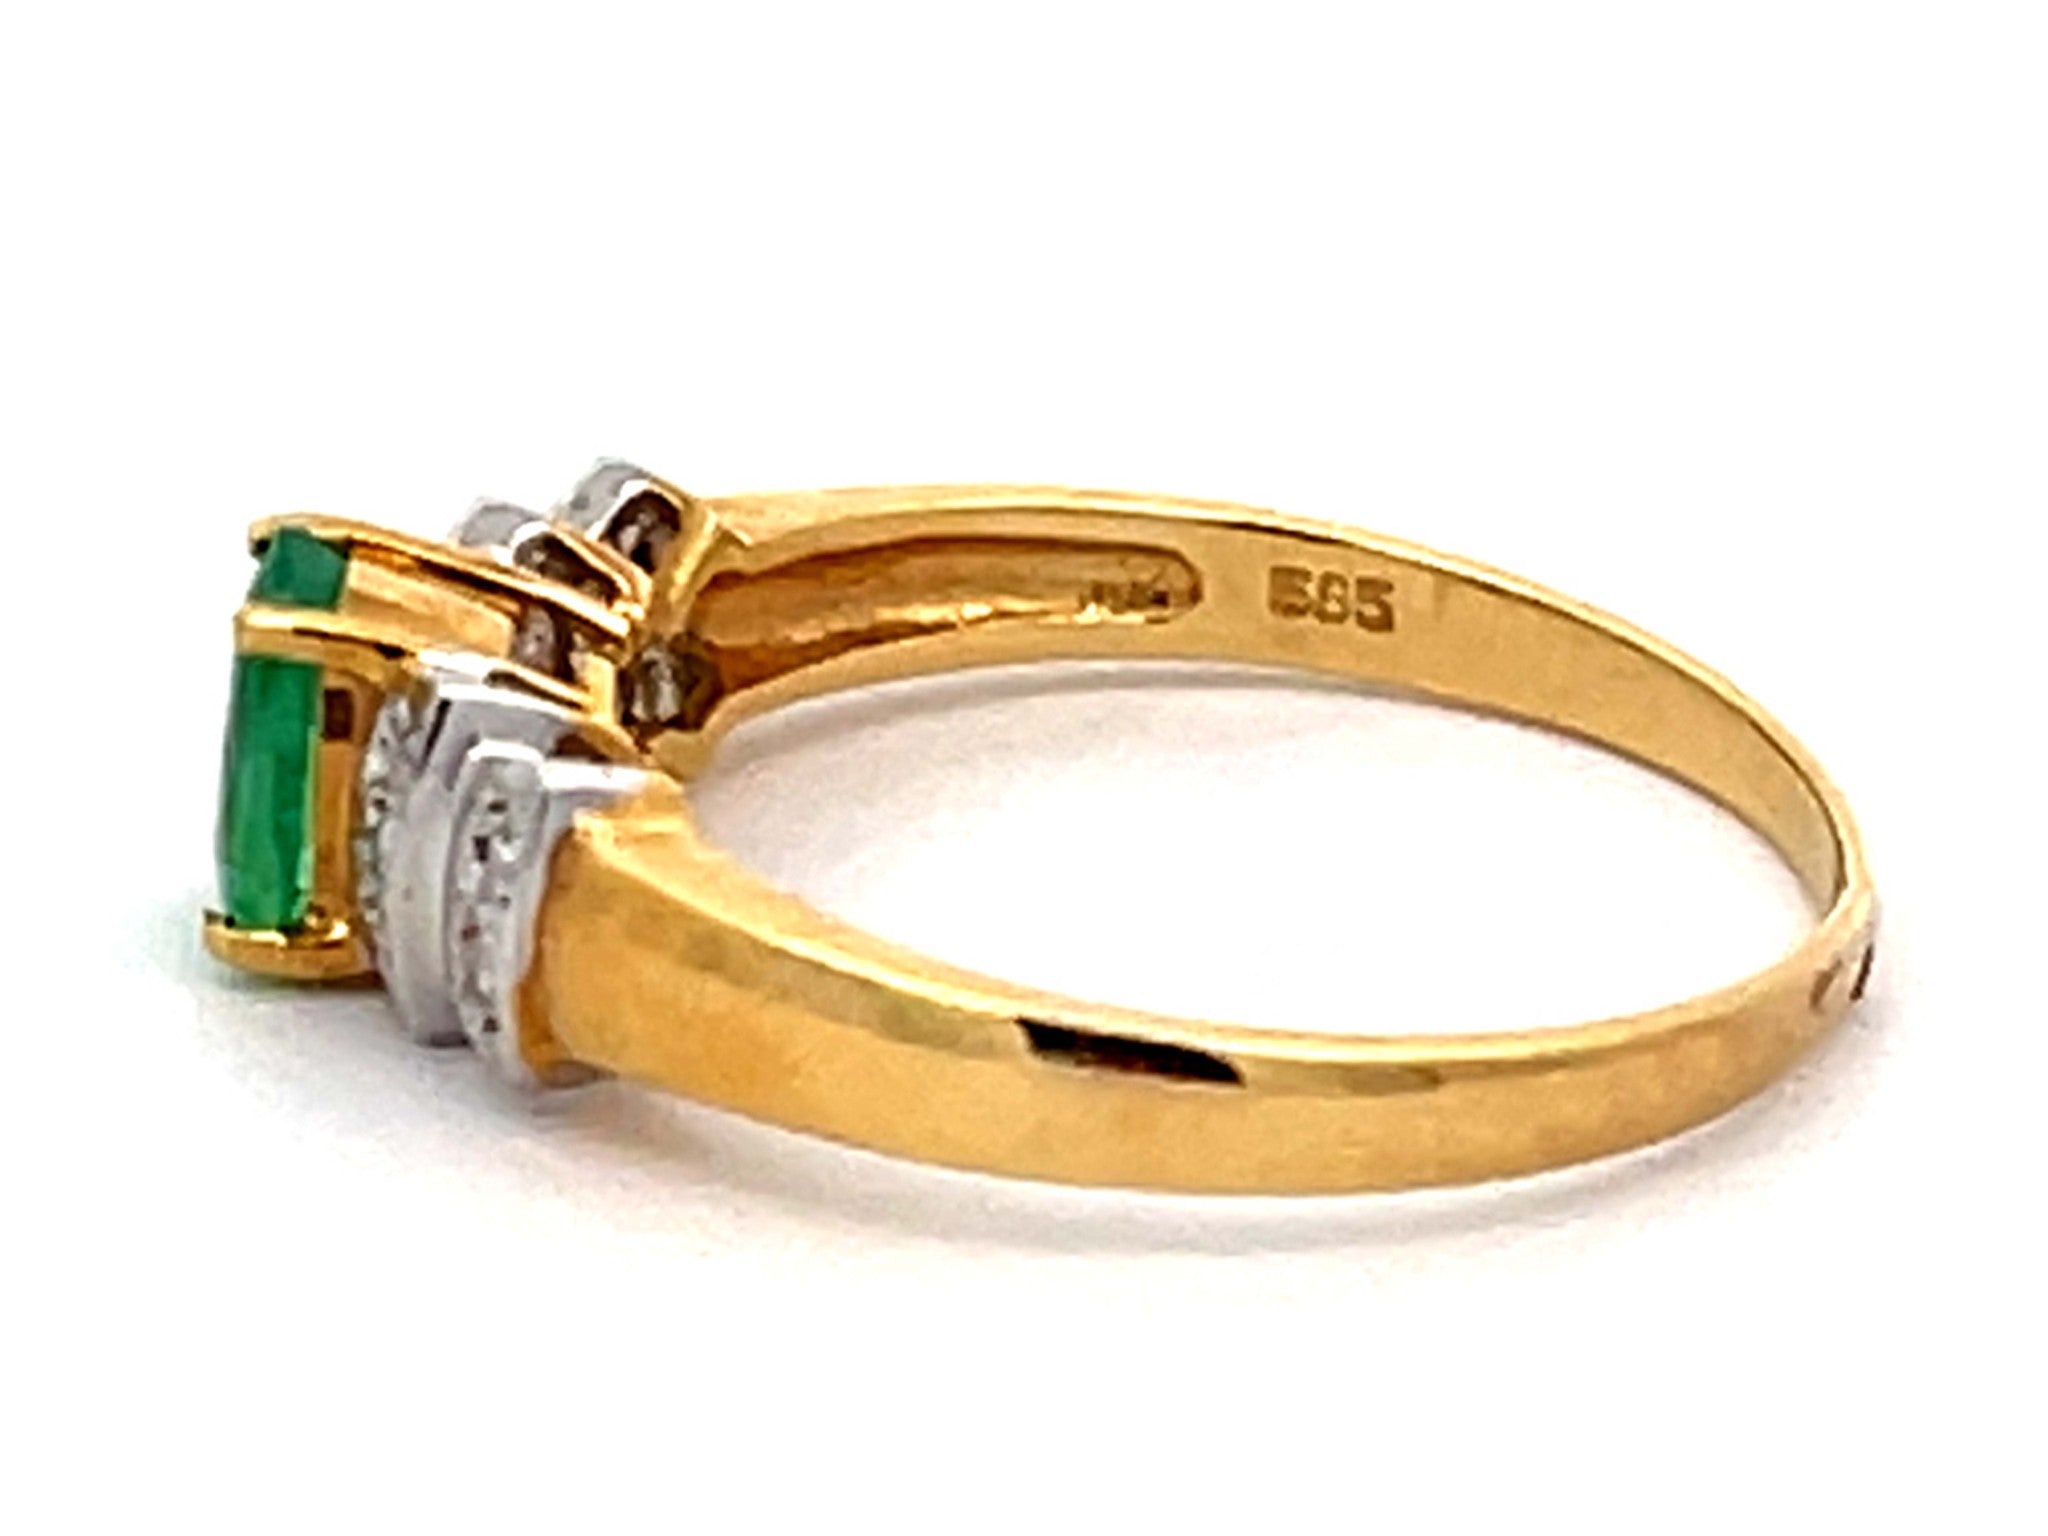 Vintage Green Oval Emerald and Diamond Ring in 14k Yellow Gold